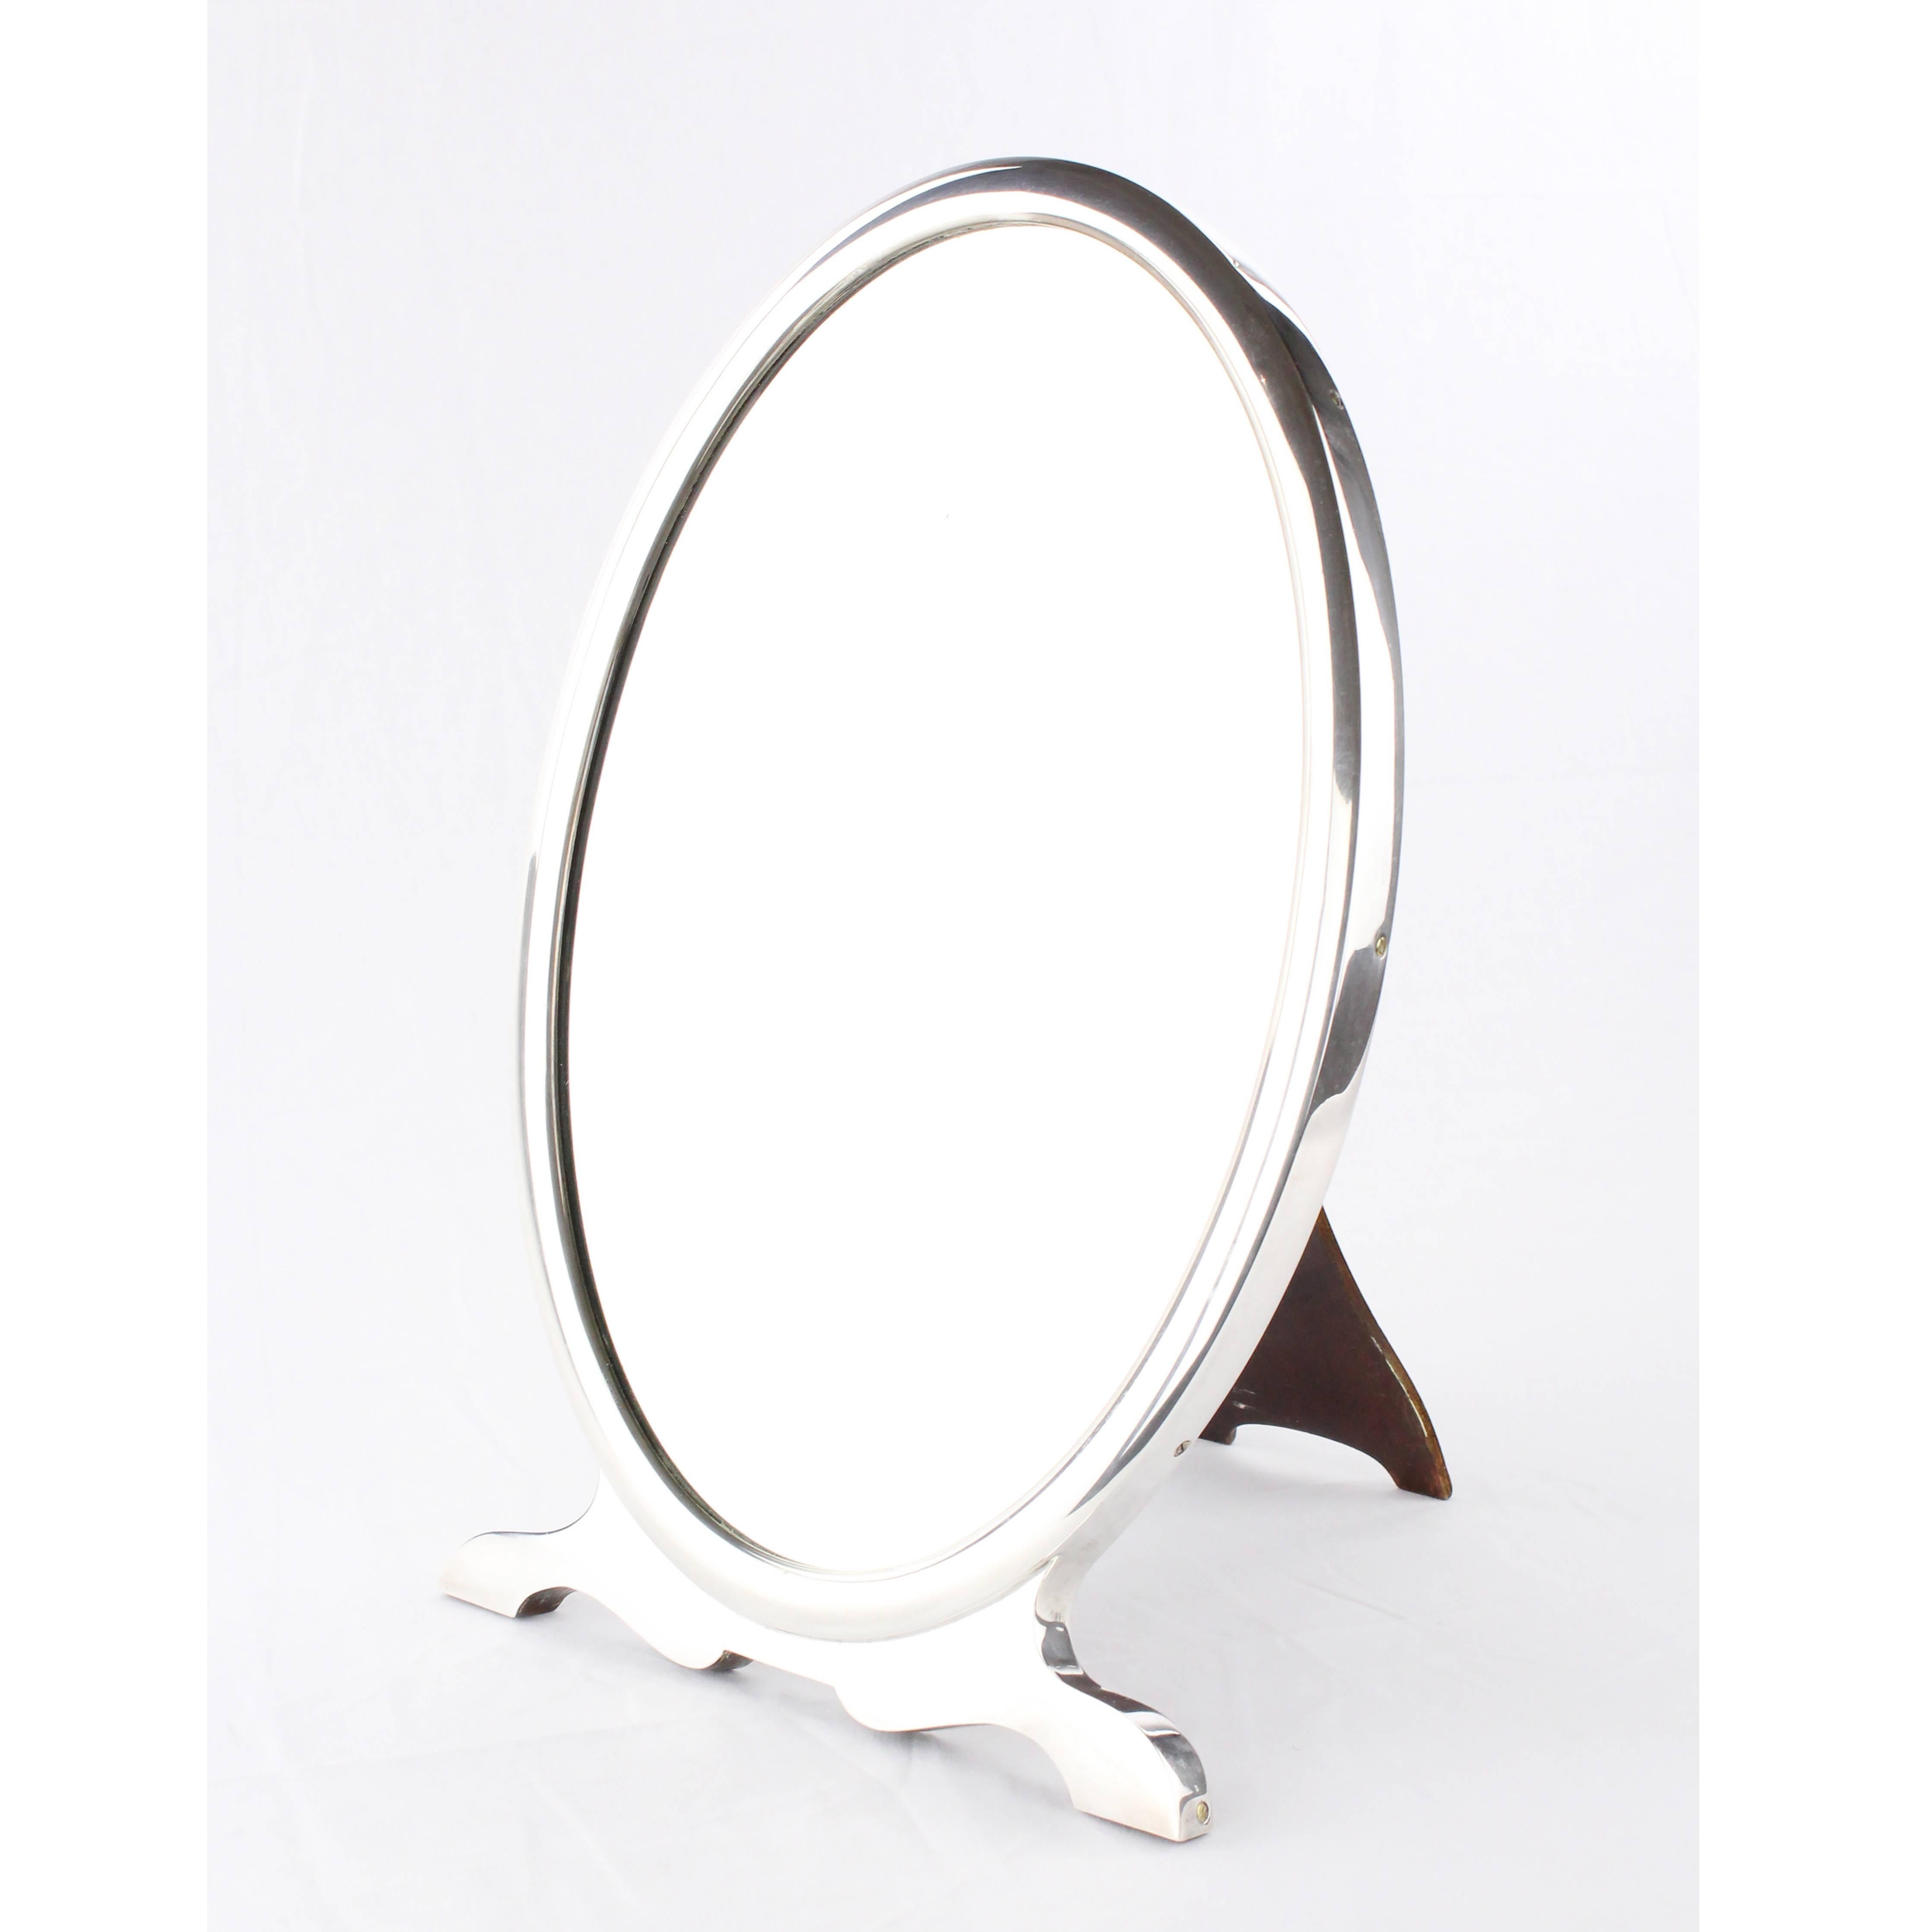 Art Deco, 925 sterling silver
circa 1920-1930
Mounted on wooden frame
Stamped half moon and crown
Measures: Height 40.5 cm, width 27.5 cm, depth: 5 cm

Delivery can be made to your door within 7 days worldwide. We already delivered to Asia, US